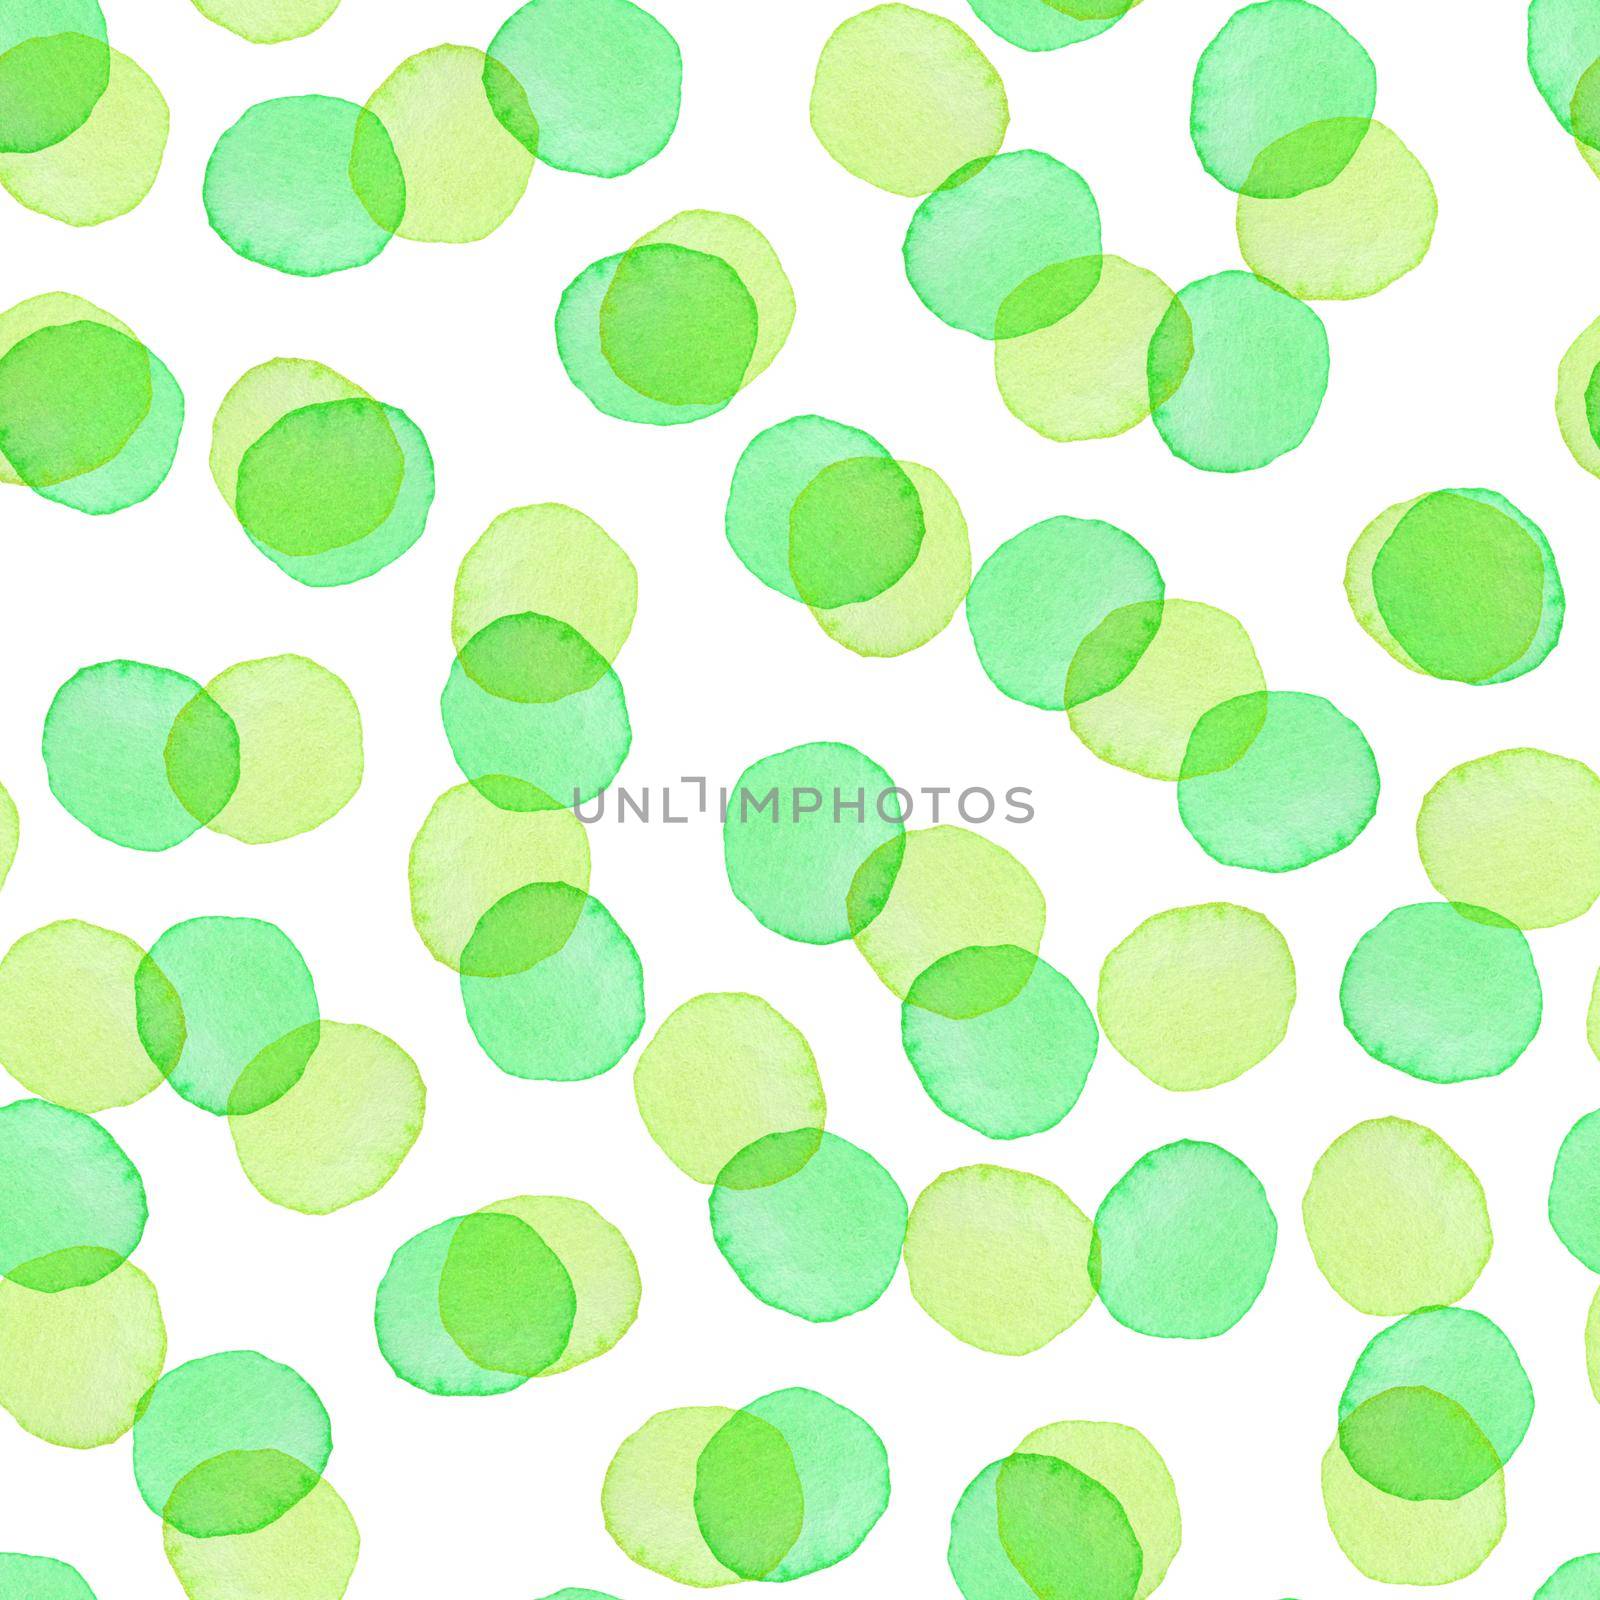 Hand Painted Brush Polka Dot Seamless Watercolor Pattern. Abstract watercolour Round Circles in Green Color. Artistic Design for Fabric and Background by DesignAB